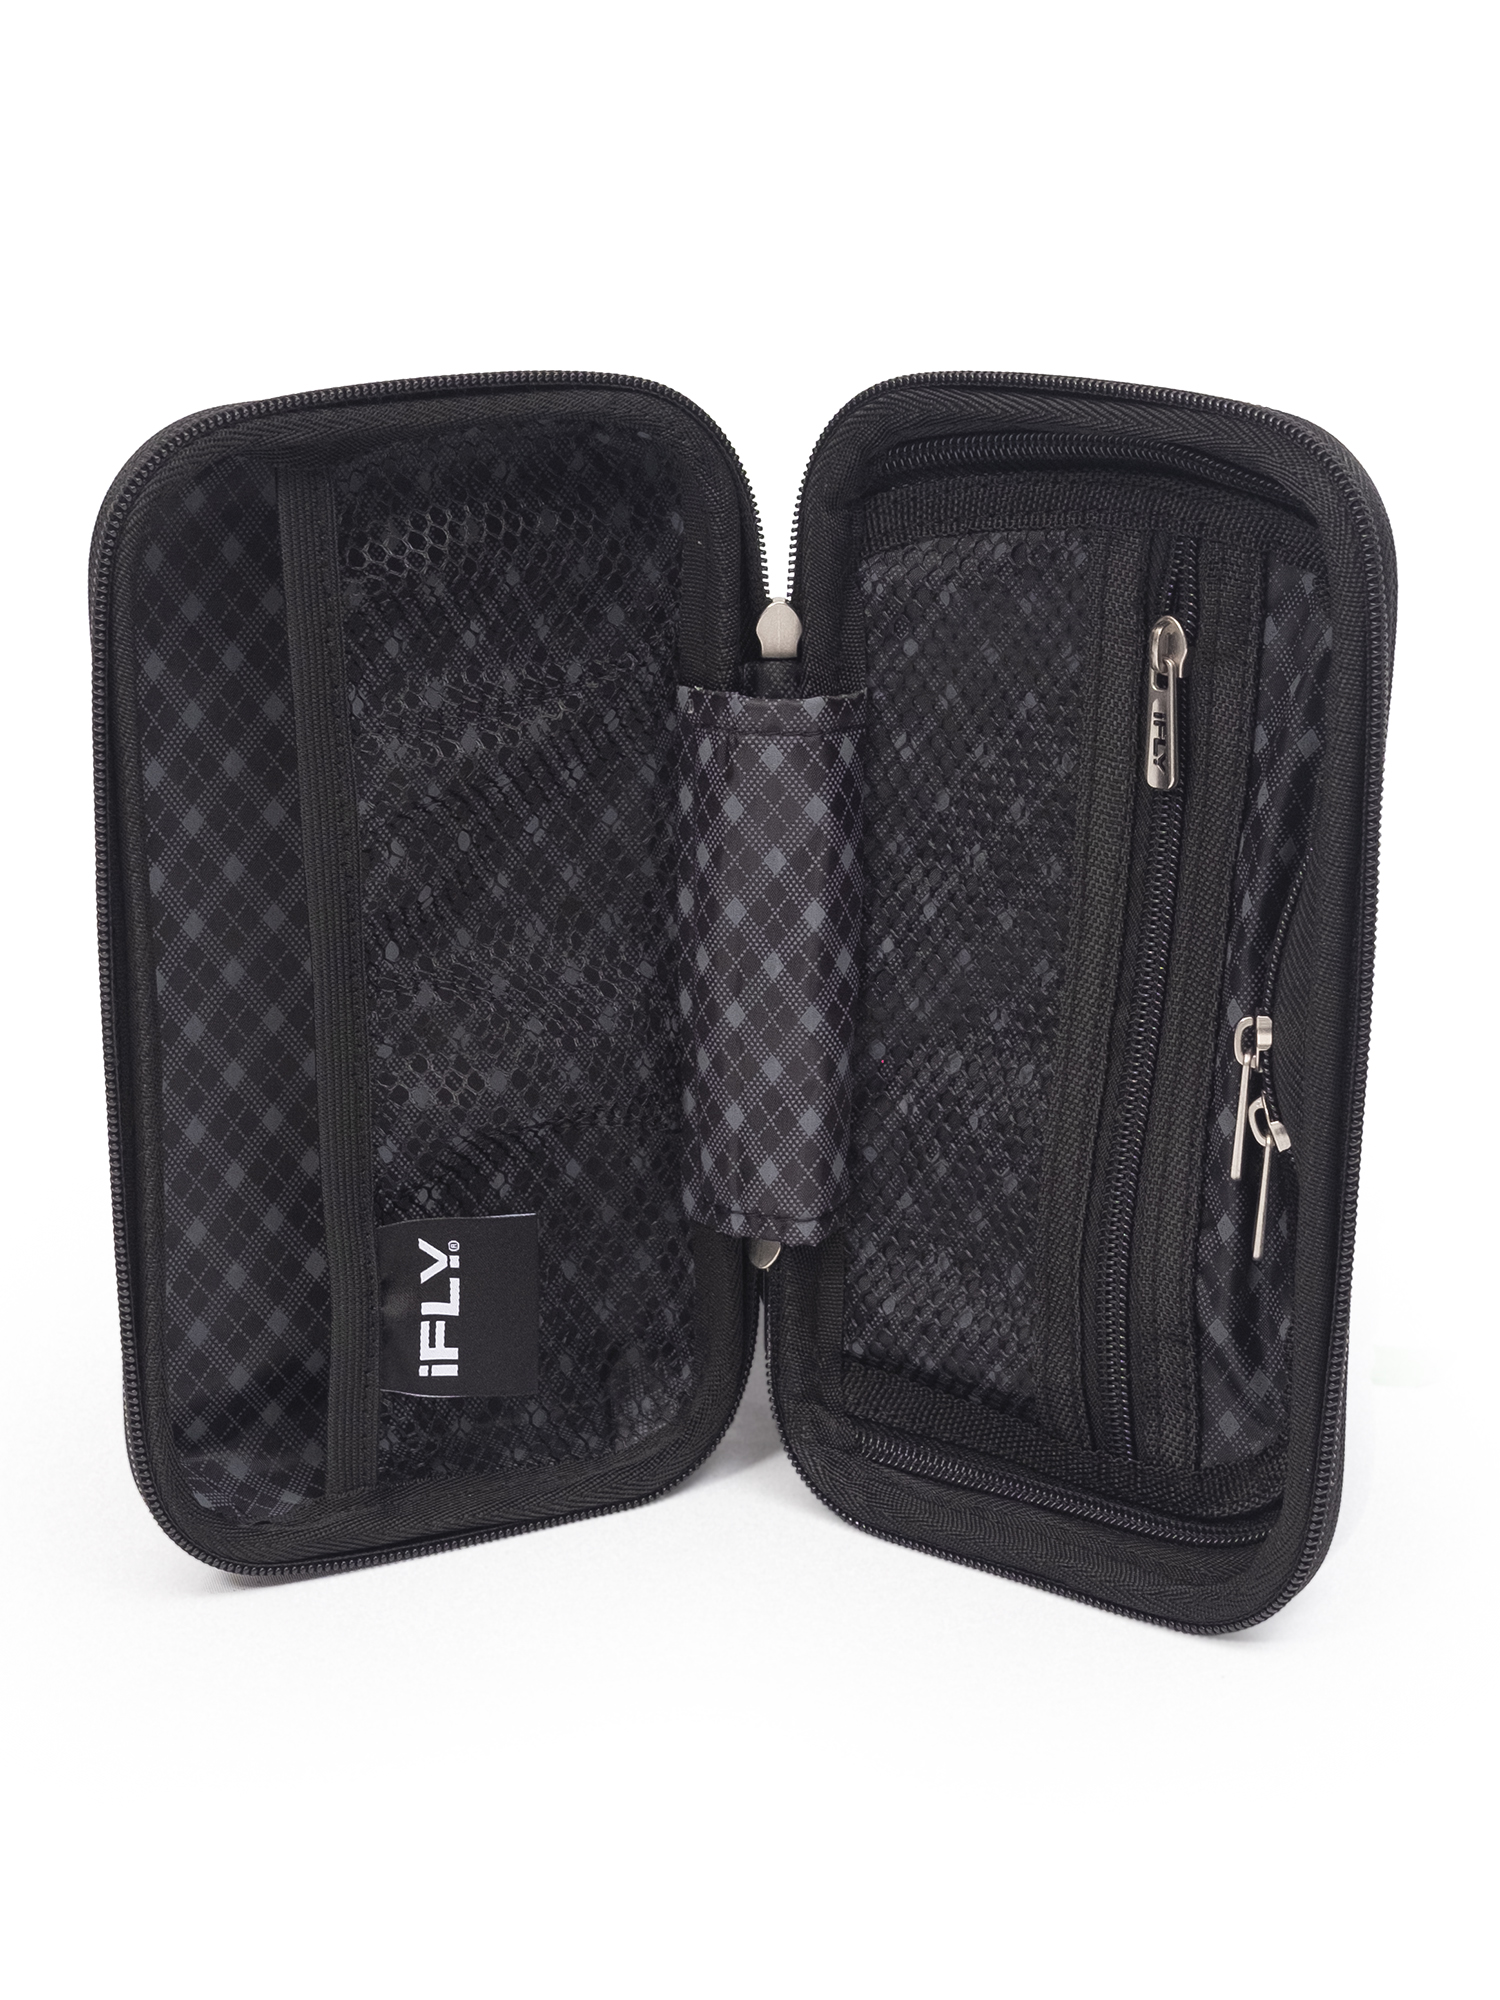 iFLY Online Exclusive Hard Sided Luggage Fibertech 20" & Travel Case - image 8 of 9